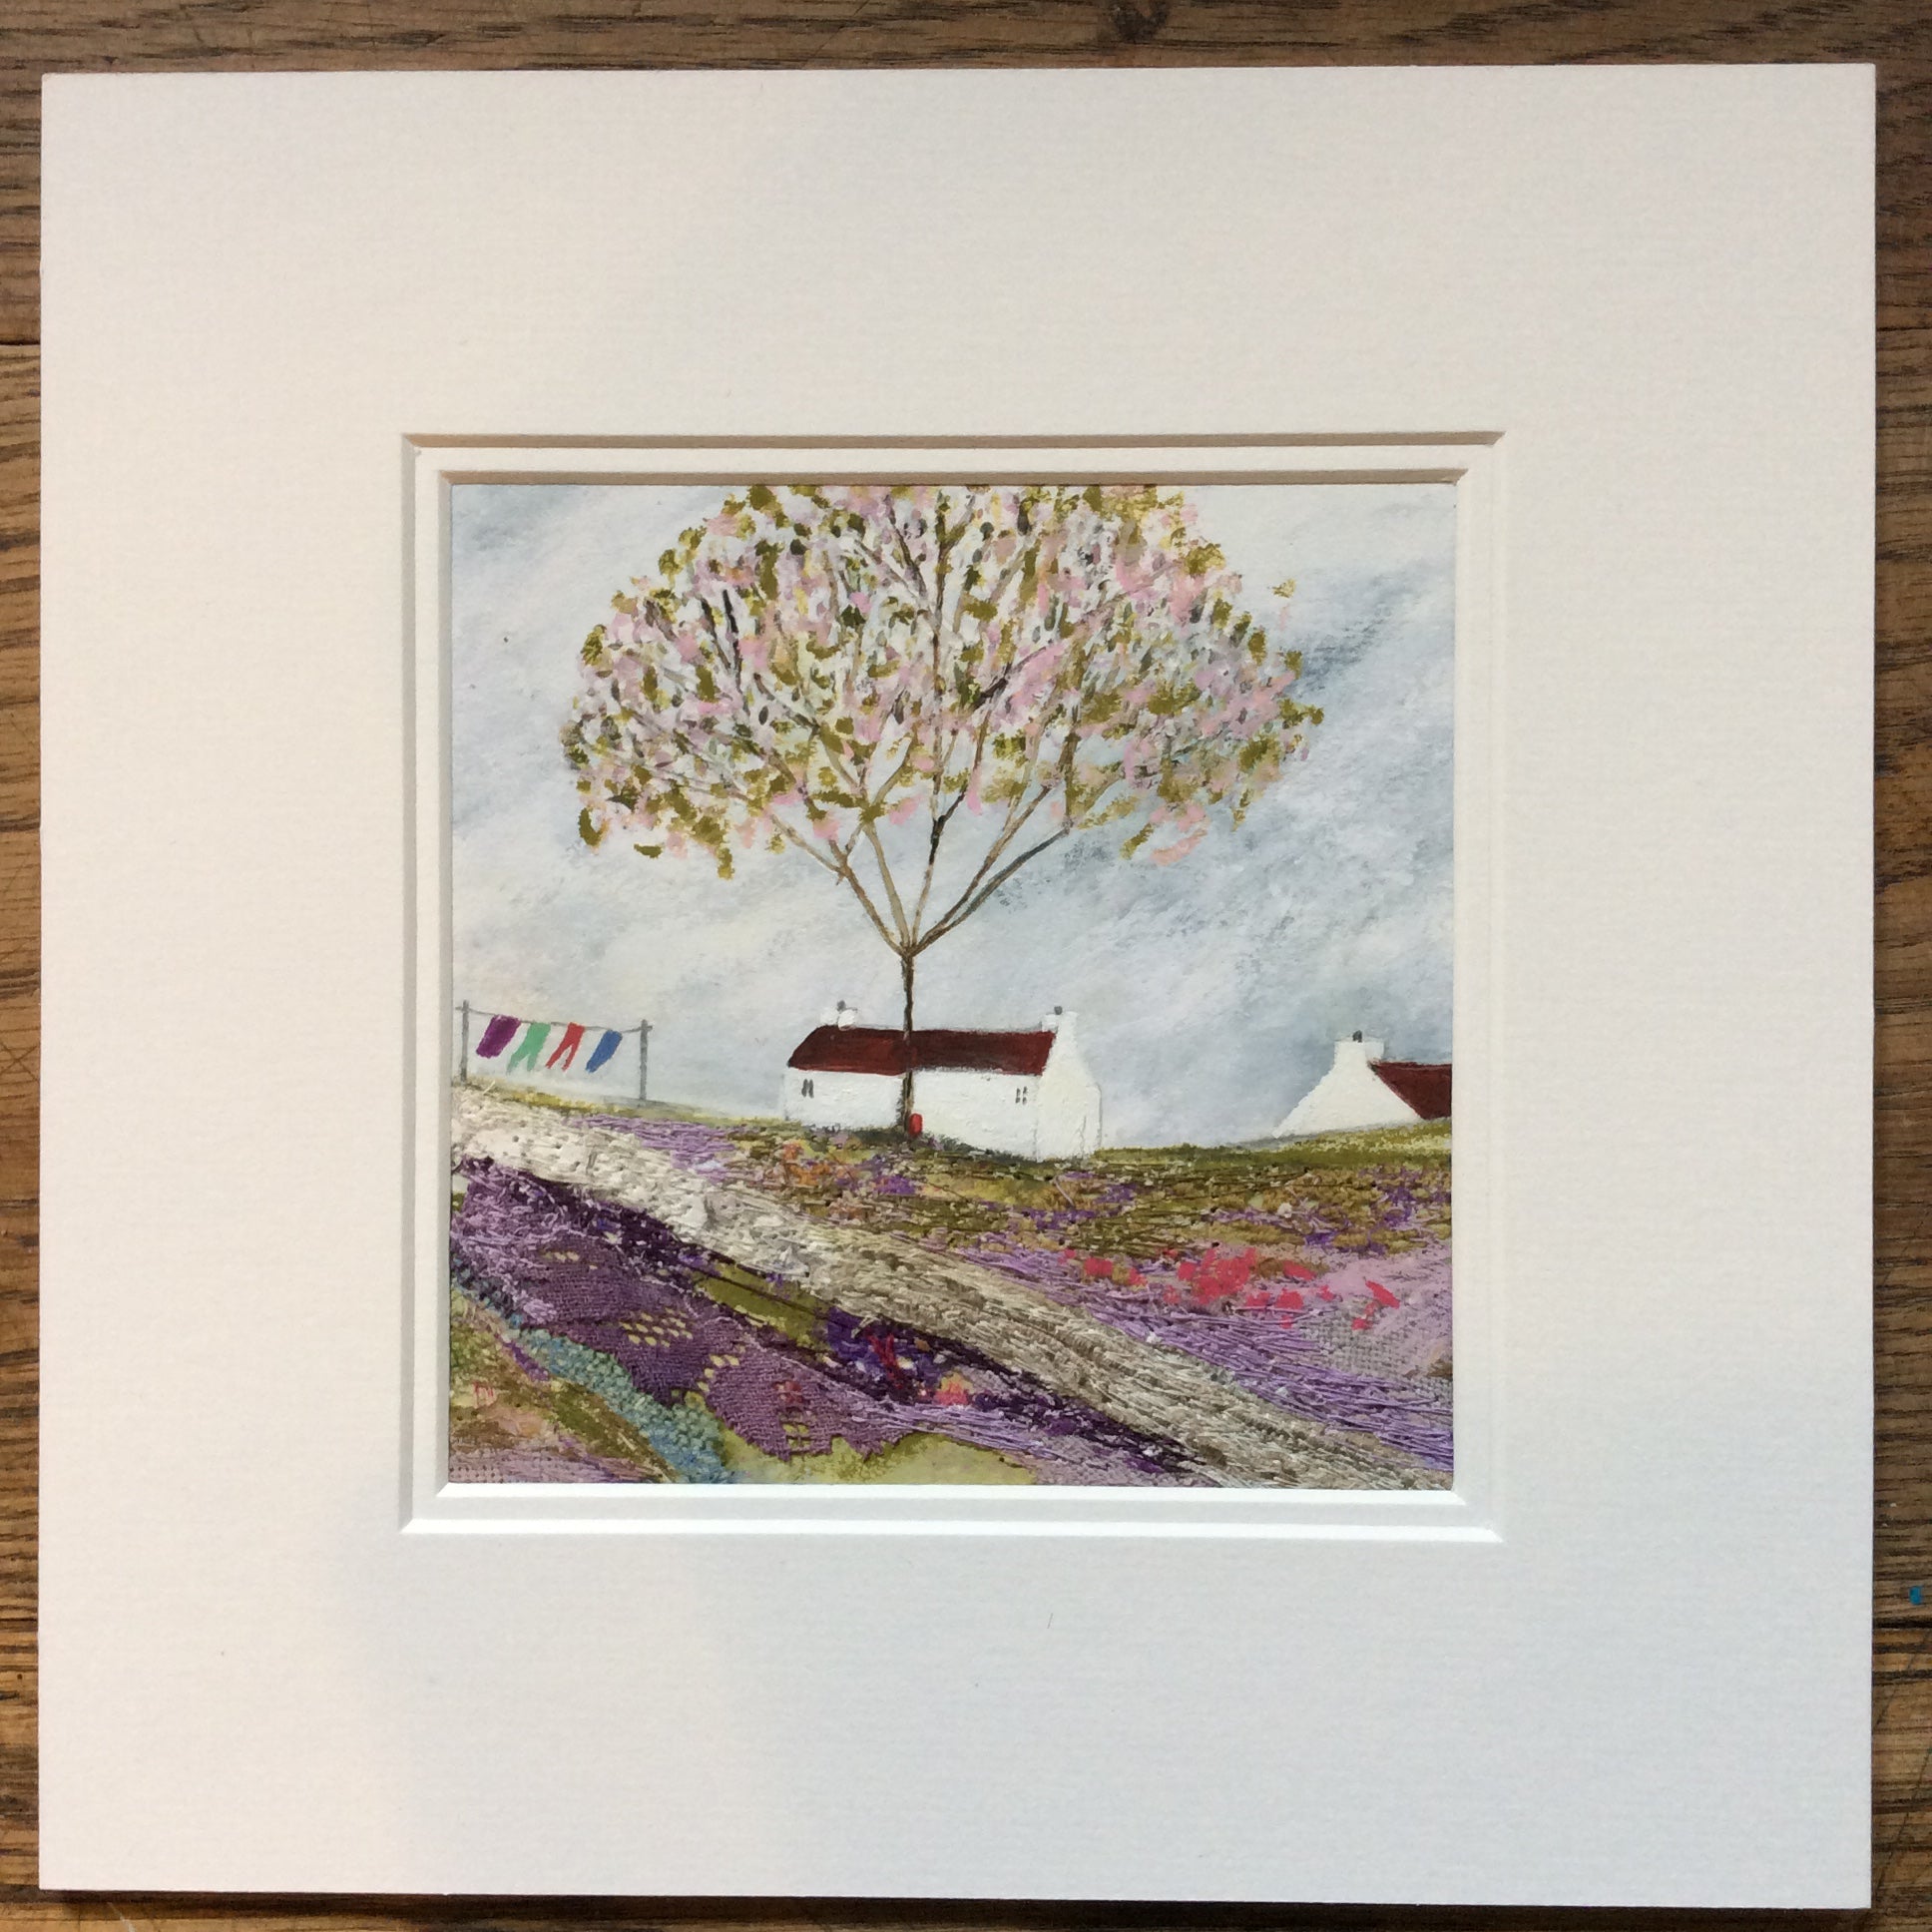 Mixed Media Art print work by Louise O'Hara "The old tree in the meadow”